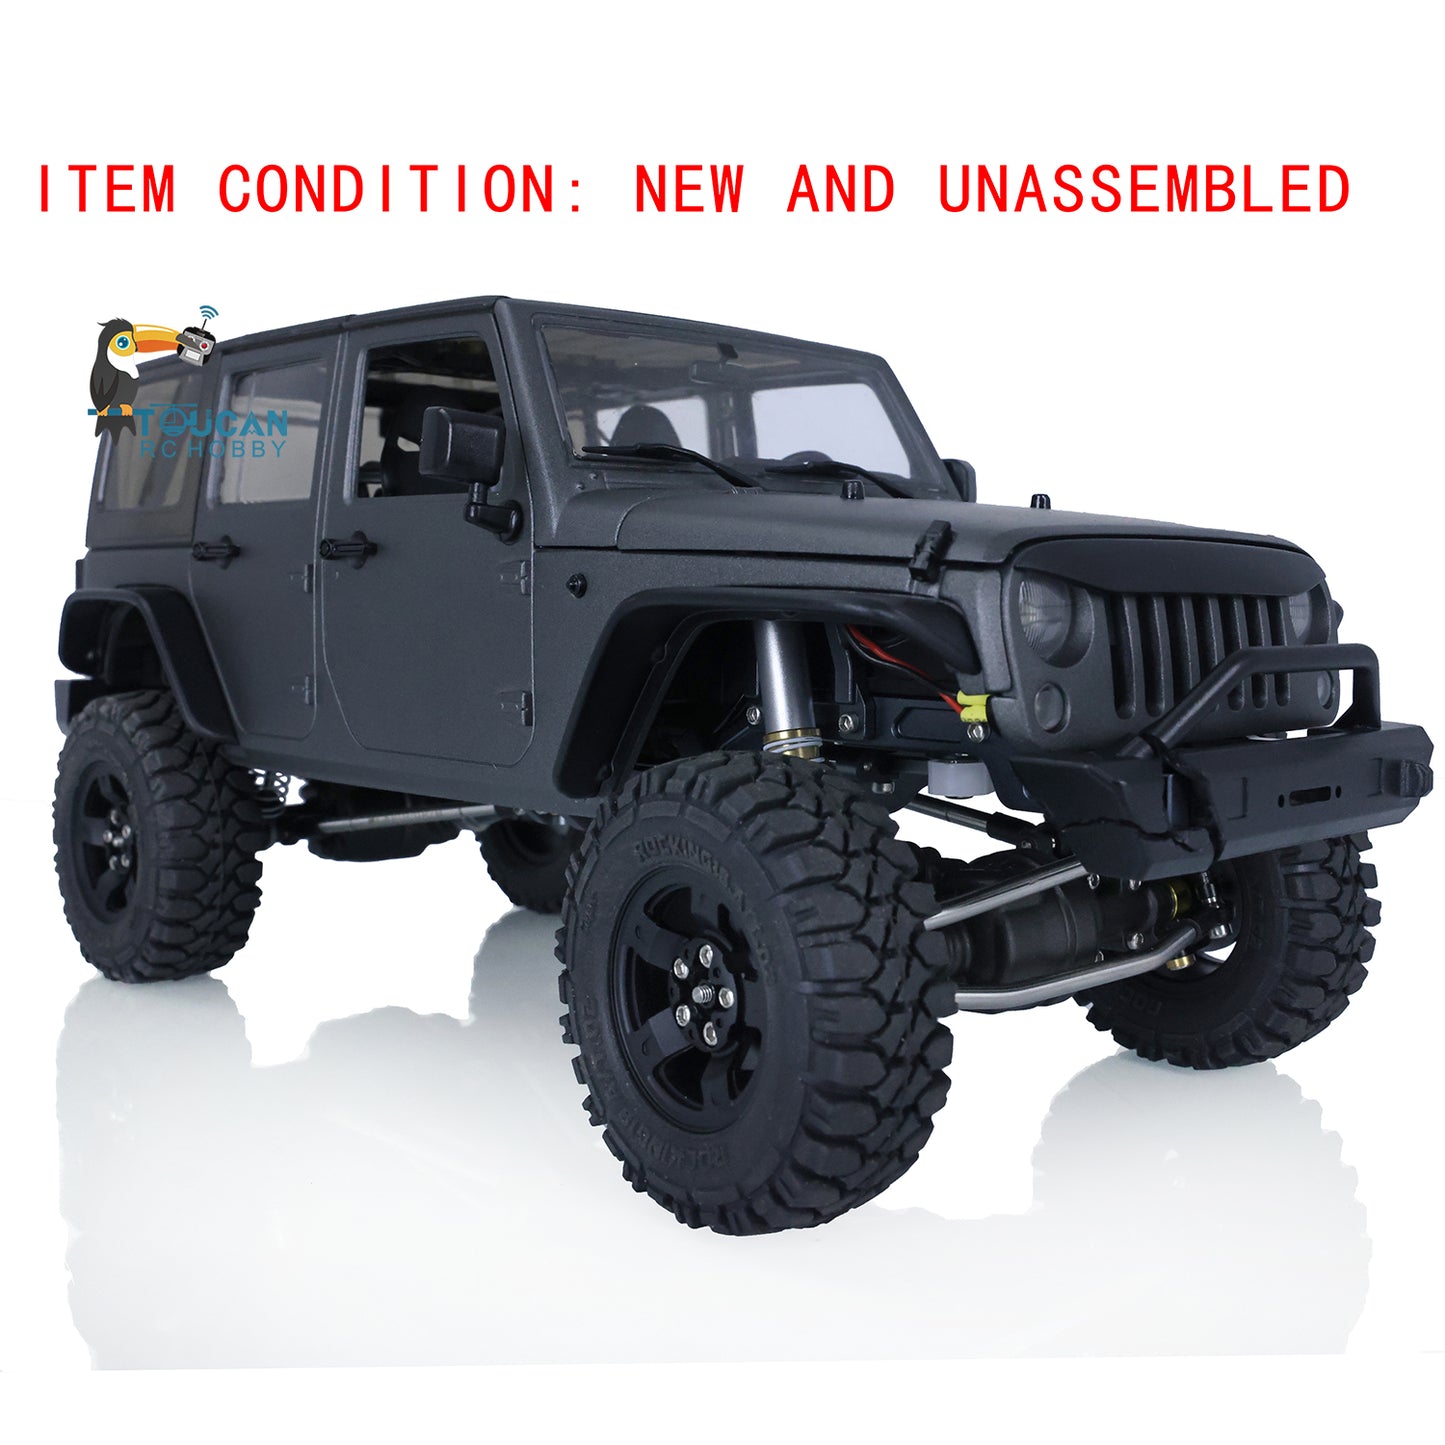 1/18 CAPO Crawler Car CUB2 JK KIT DIY RC Model Plastic Unassembled Cabin Car Shell Metal Chassis W/ 2Speed Gearbox Differential